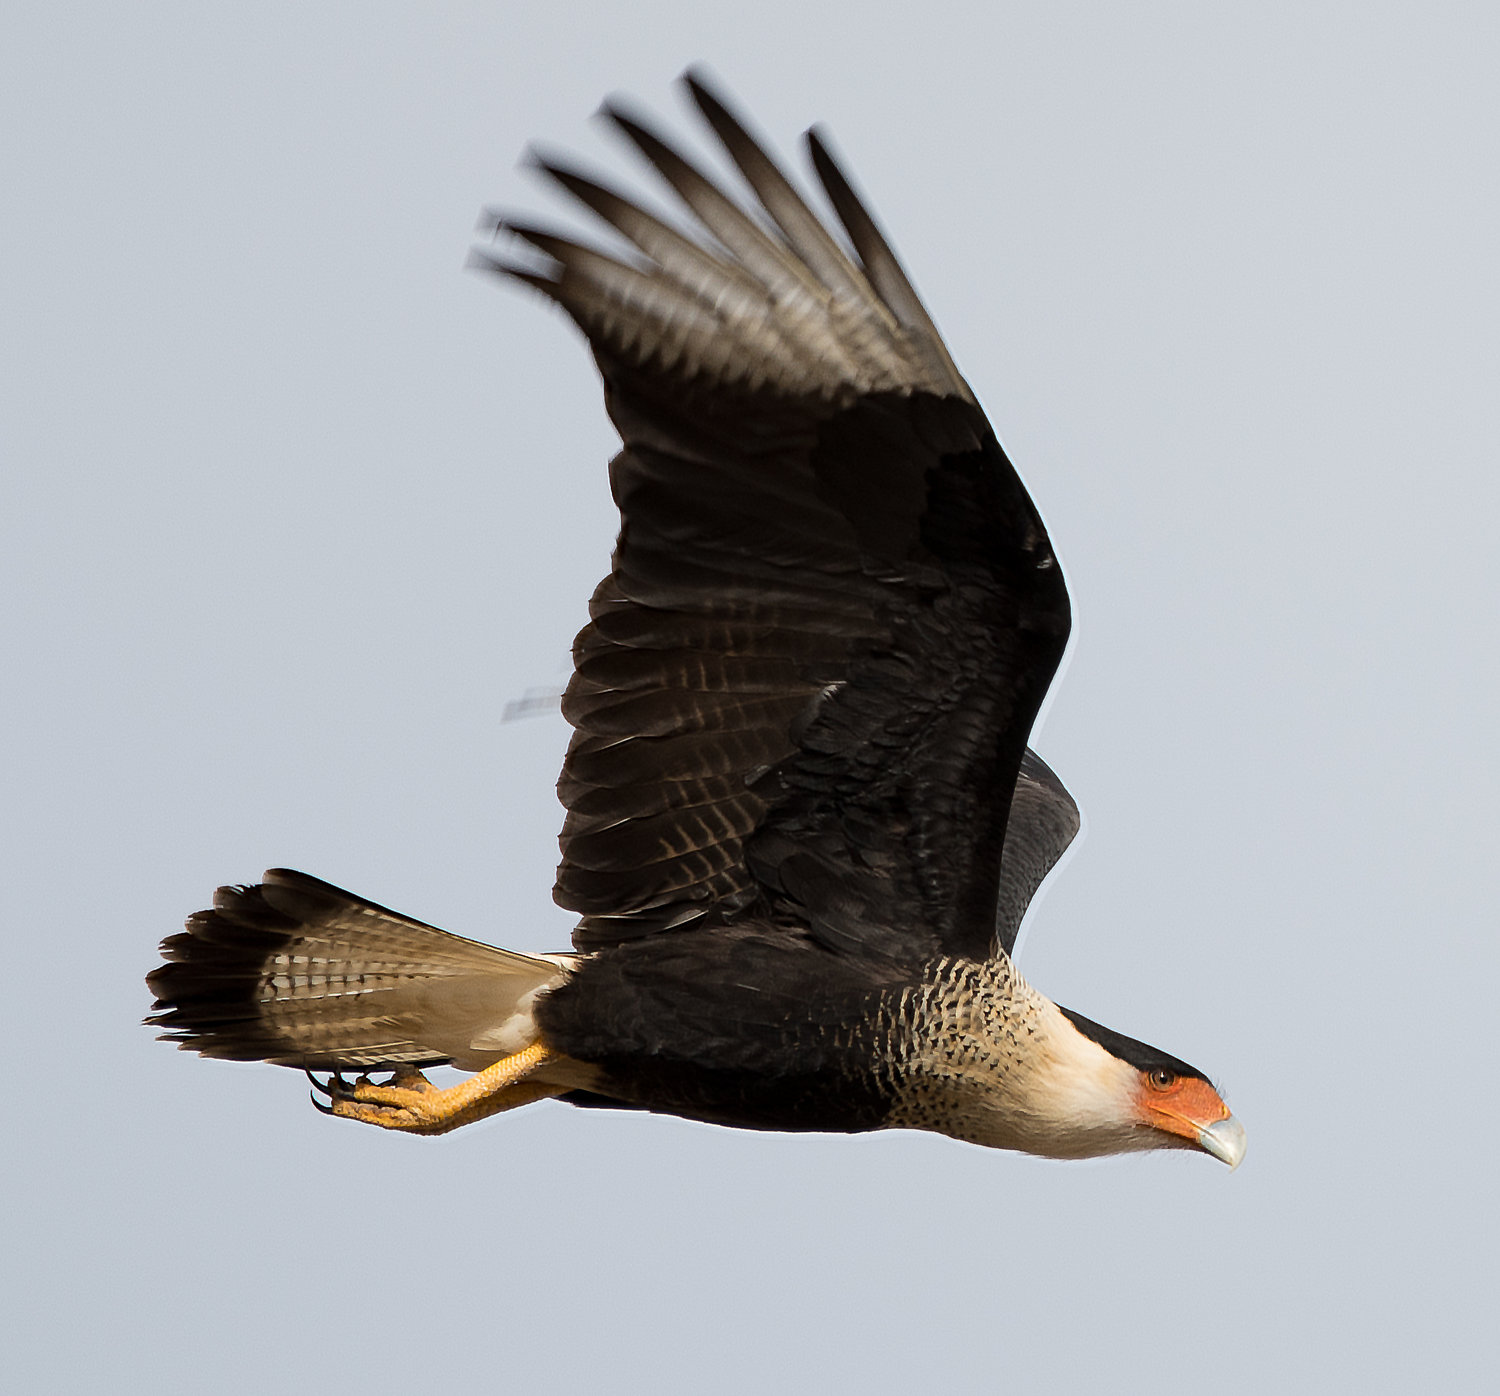 Often mistaken for young bald eagles, a caracara is captured in flight.